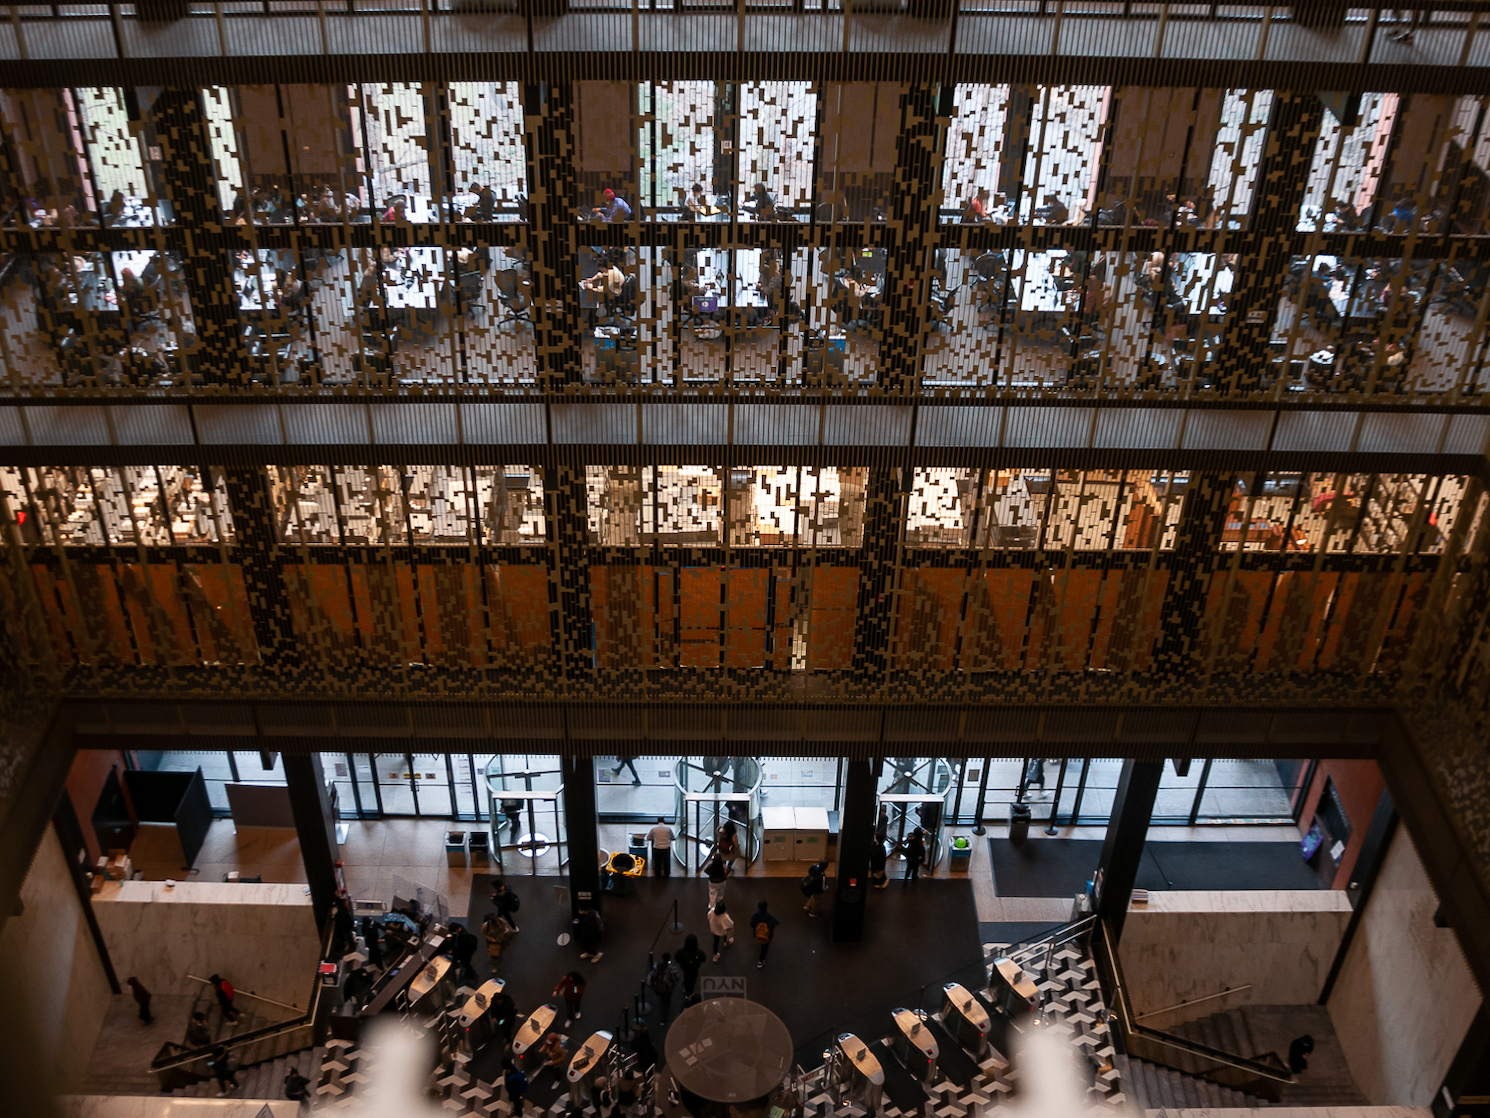 An image of Bobst Library looking down on the ground-floor atrium. On each level, metal screens run from the floor to the ceiling.